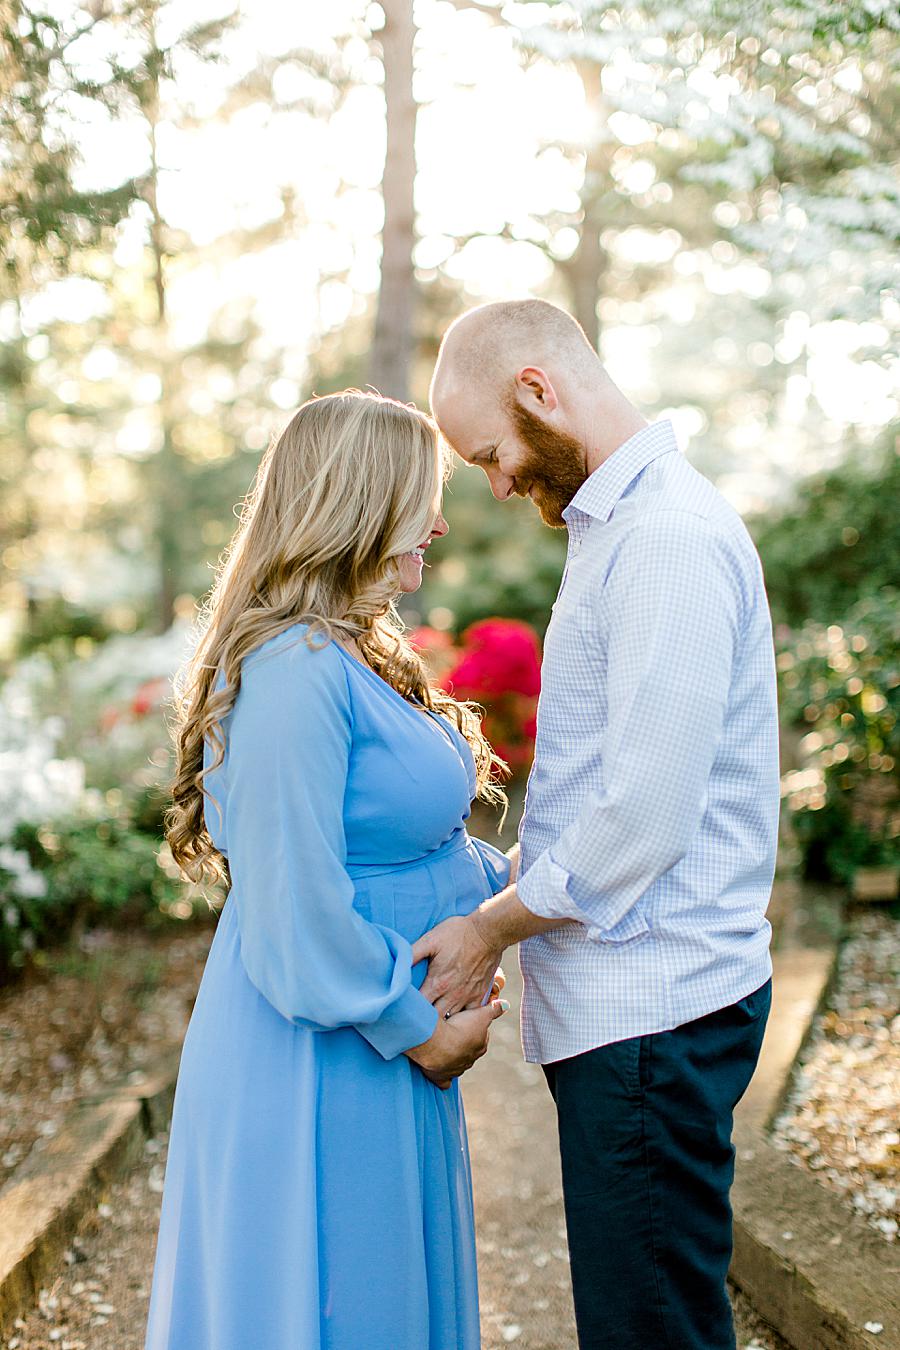 Touching the bump at this Maternity Pictures by Knoxville Wedding Photographer, Amanda May Photos.